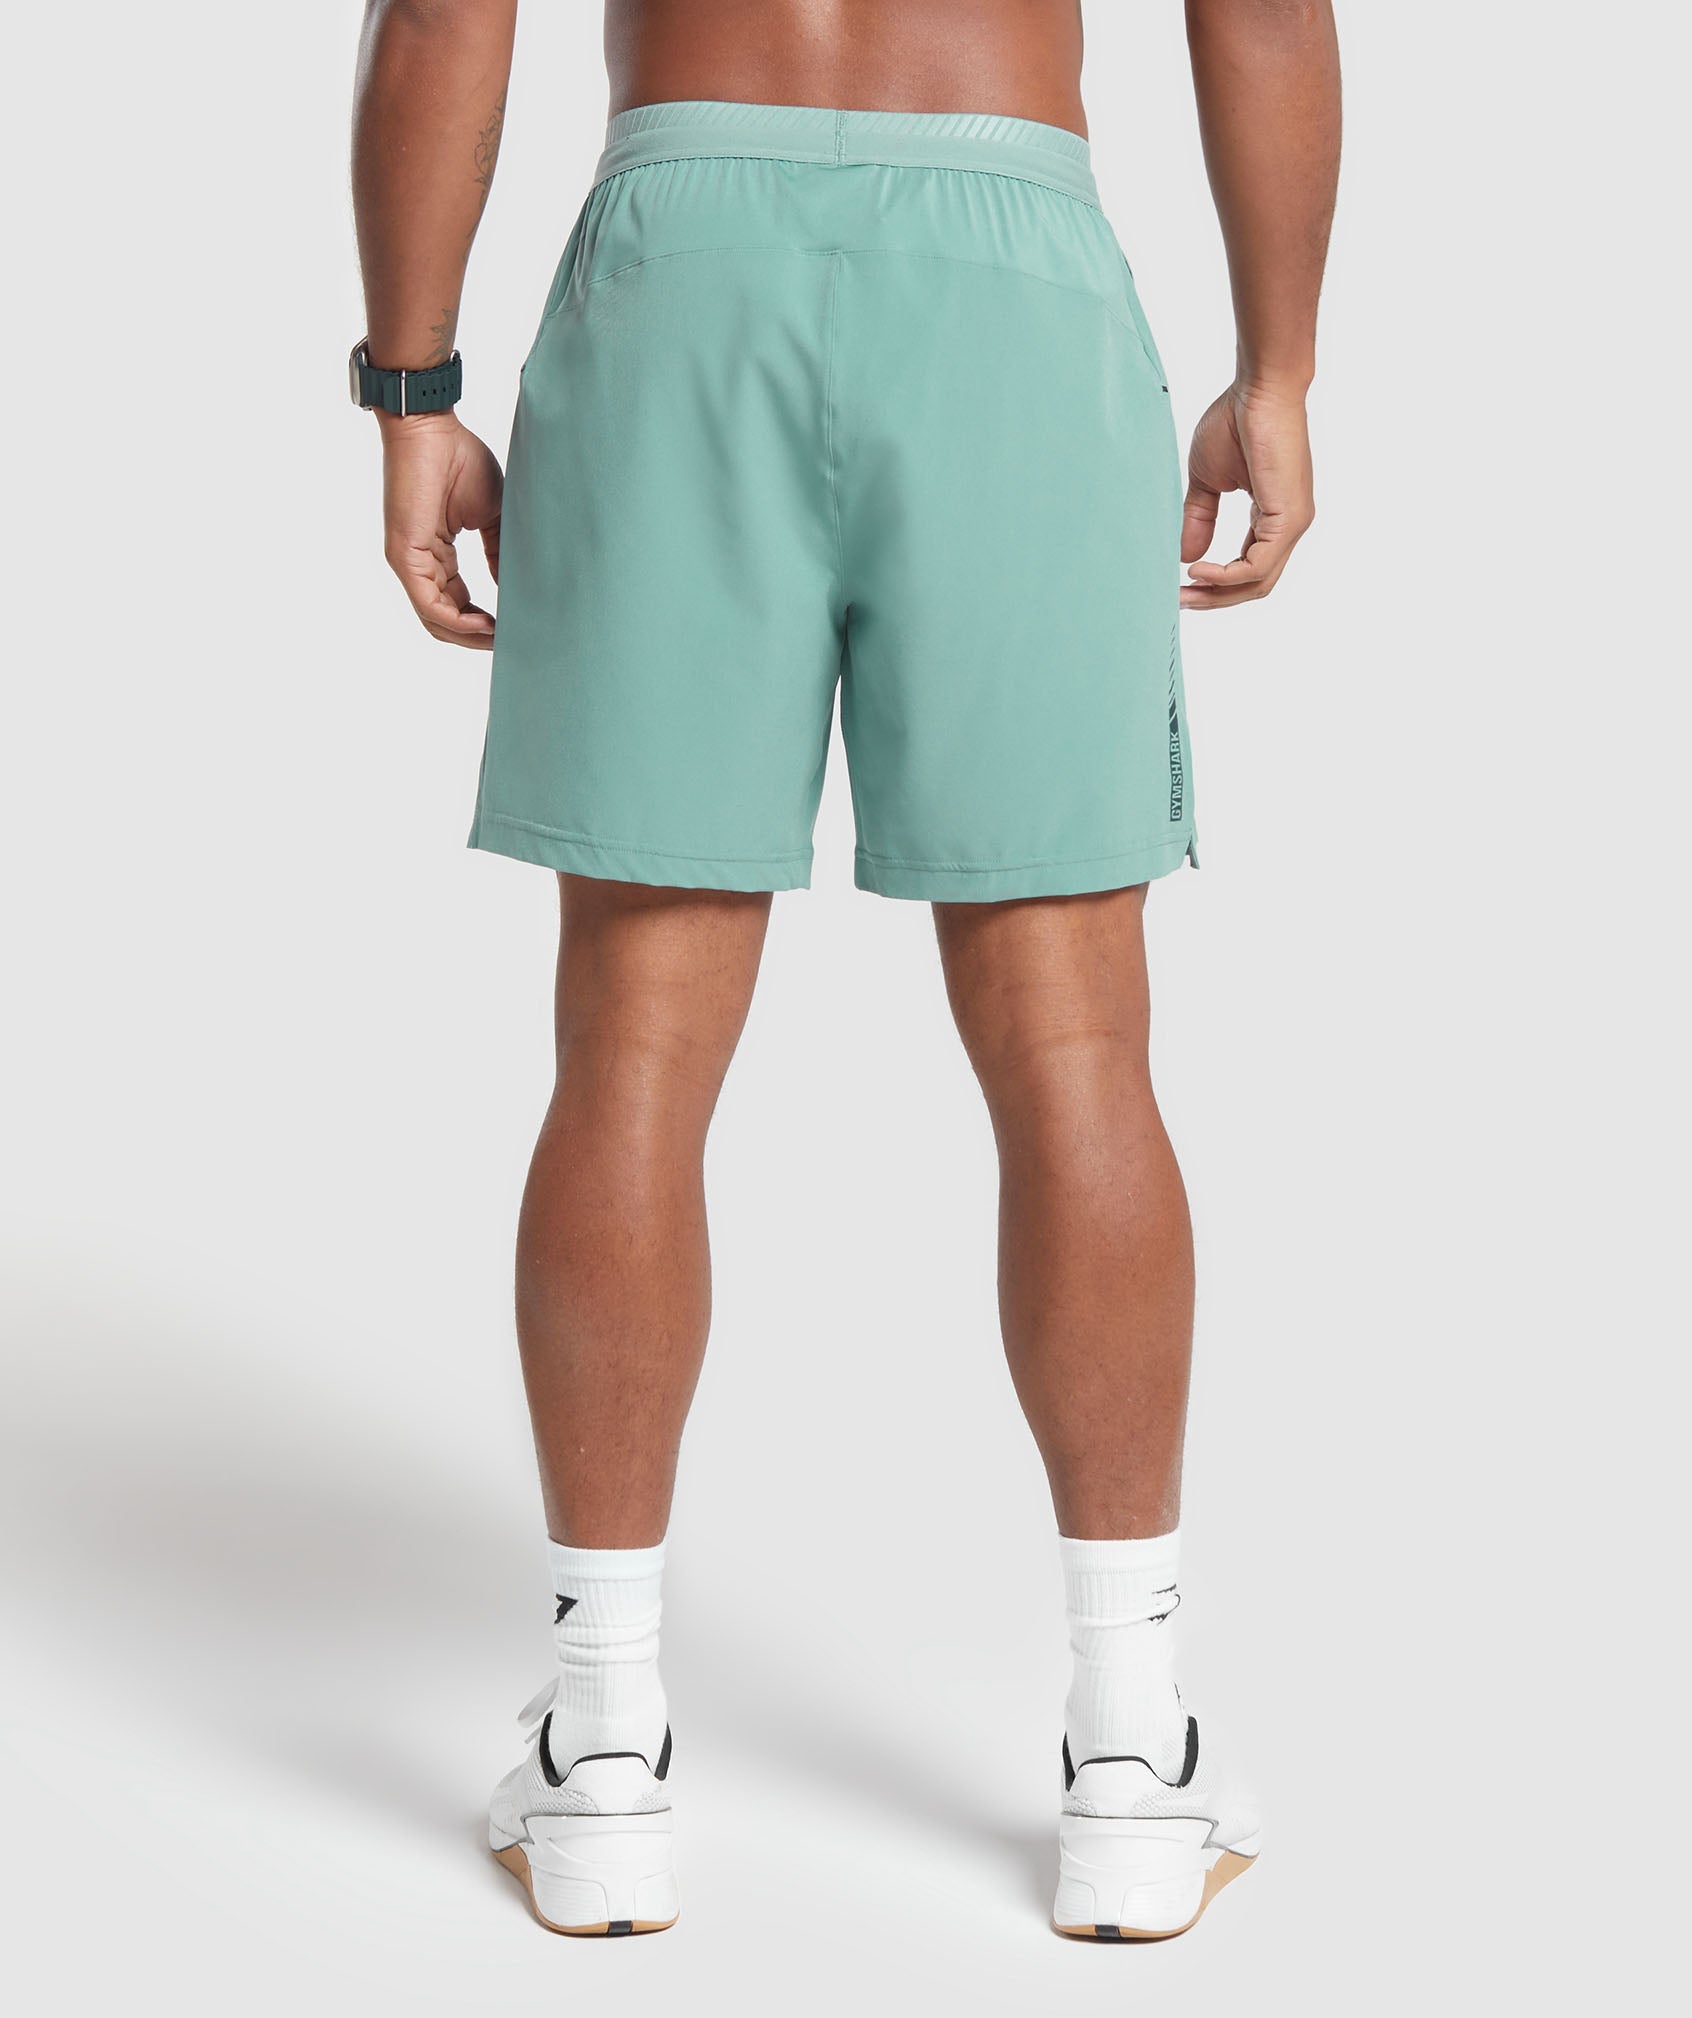 Apex 7" Hybrid Shorts in Duck Egg Blue - view 2